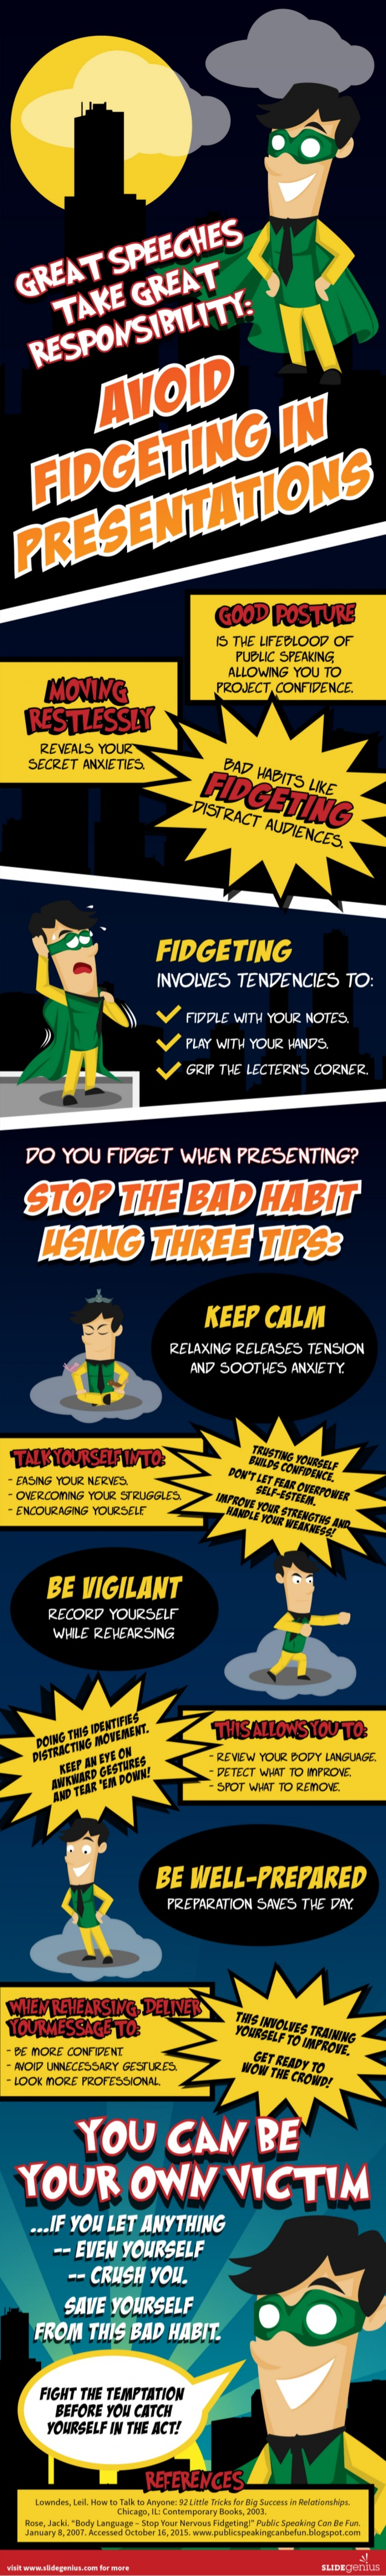  How Does Fidgeting Affect Your Professional Presentation? Infographic